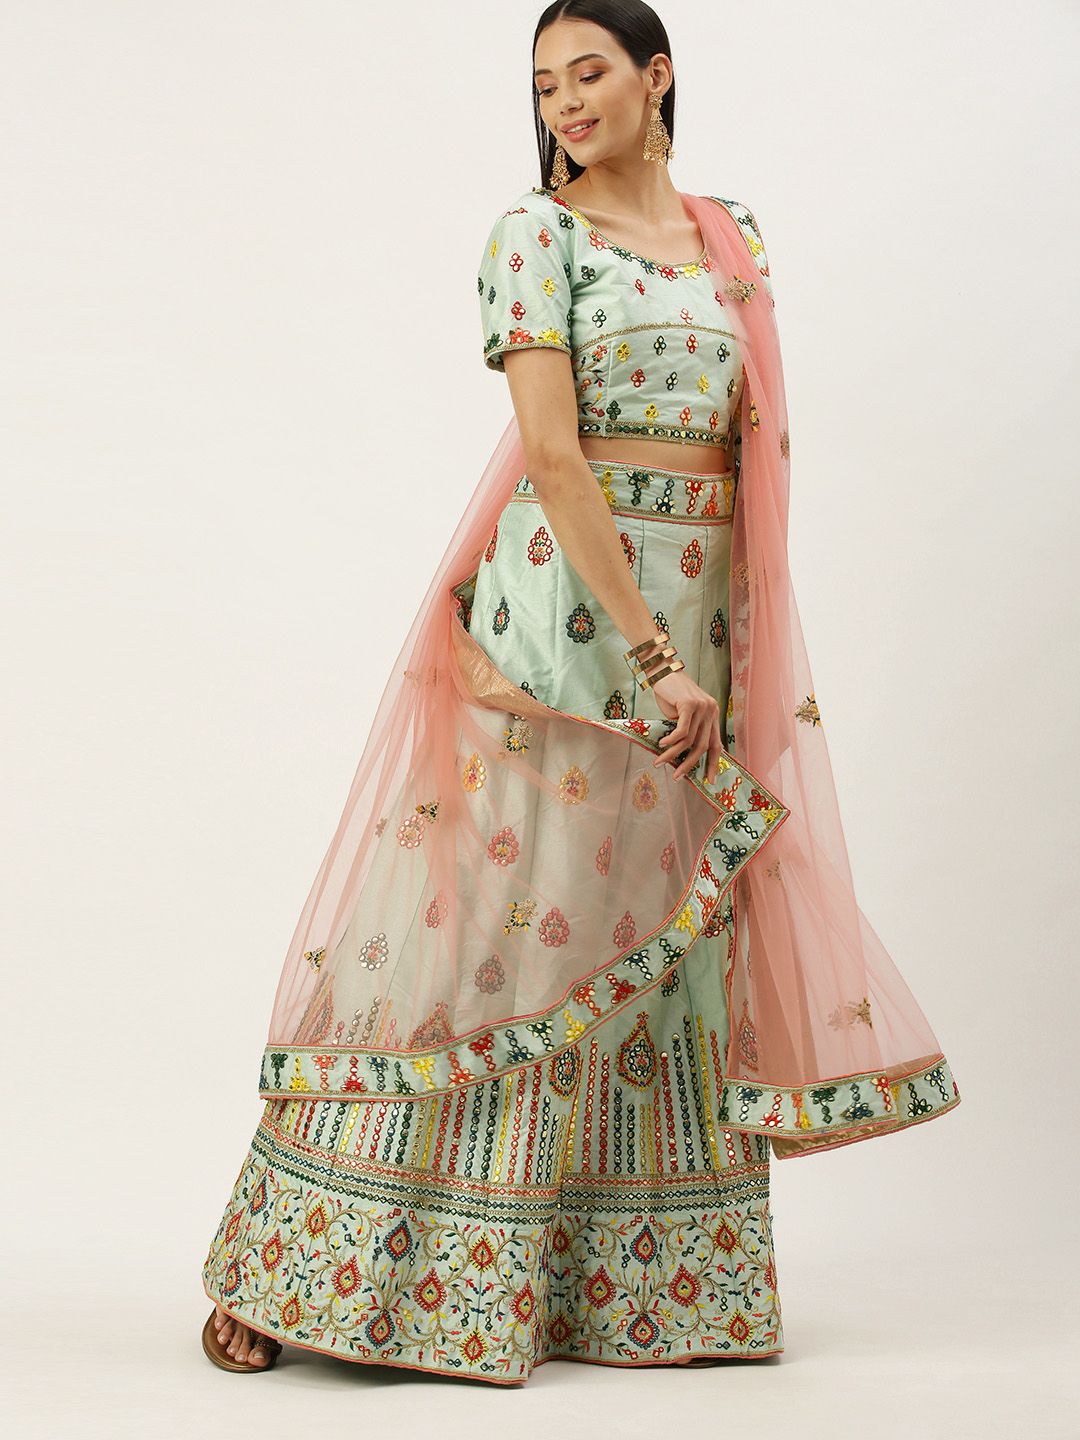 Mameraa Turquoise Blue & Peach-Coloured Embroidered Semi-Stitched Lehenga & Unstitched Blouse With Dupatta Price in India